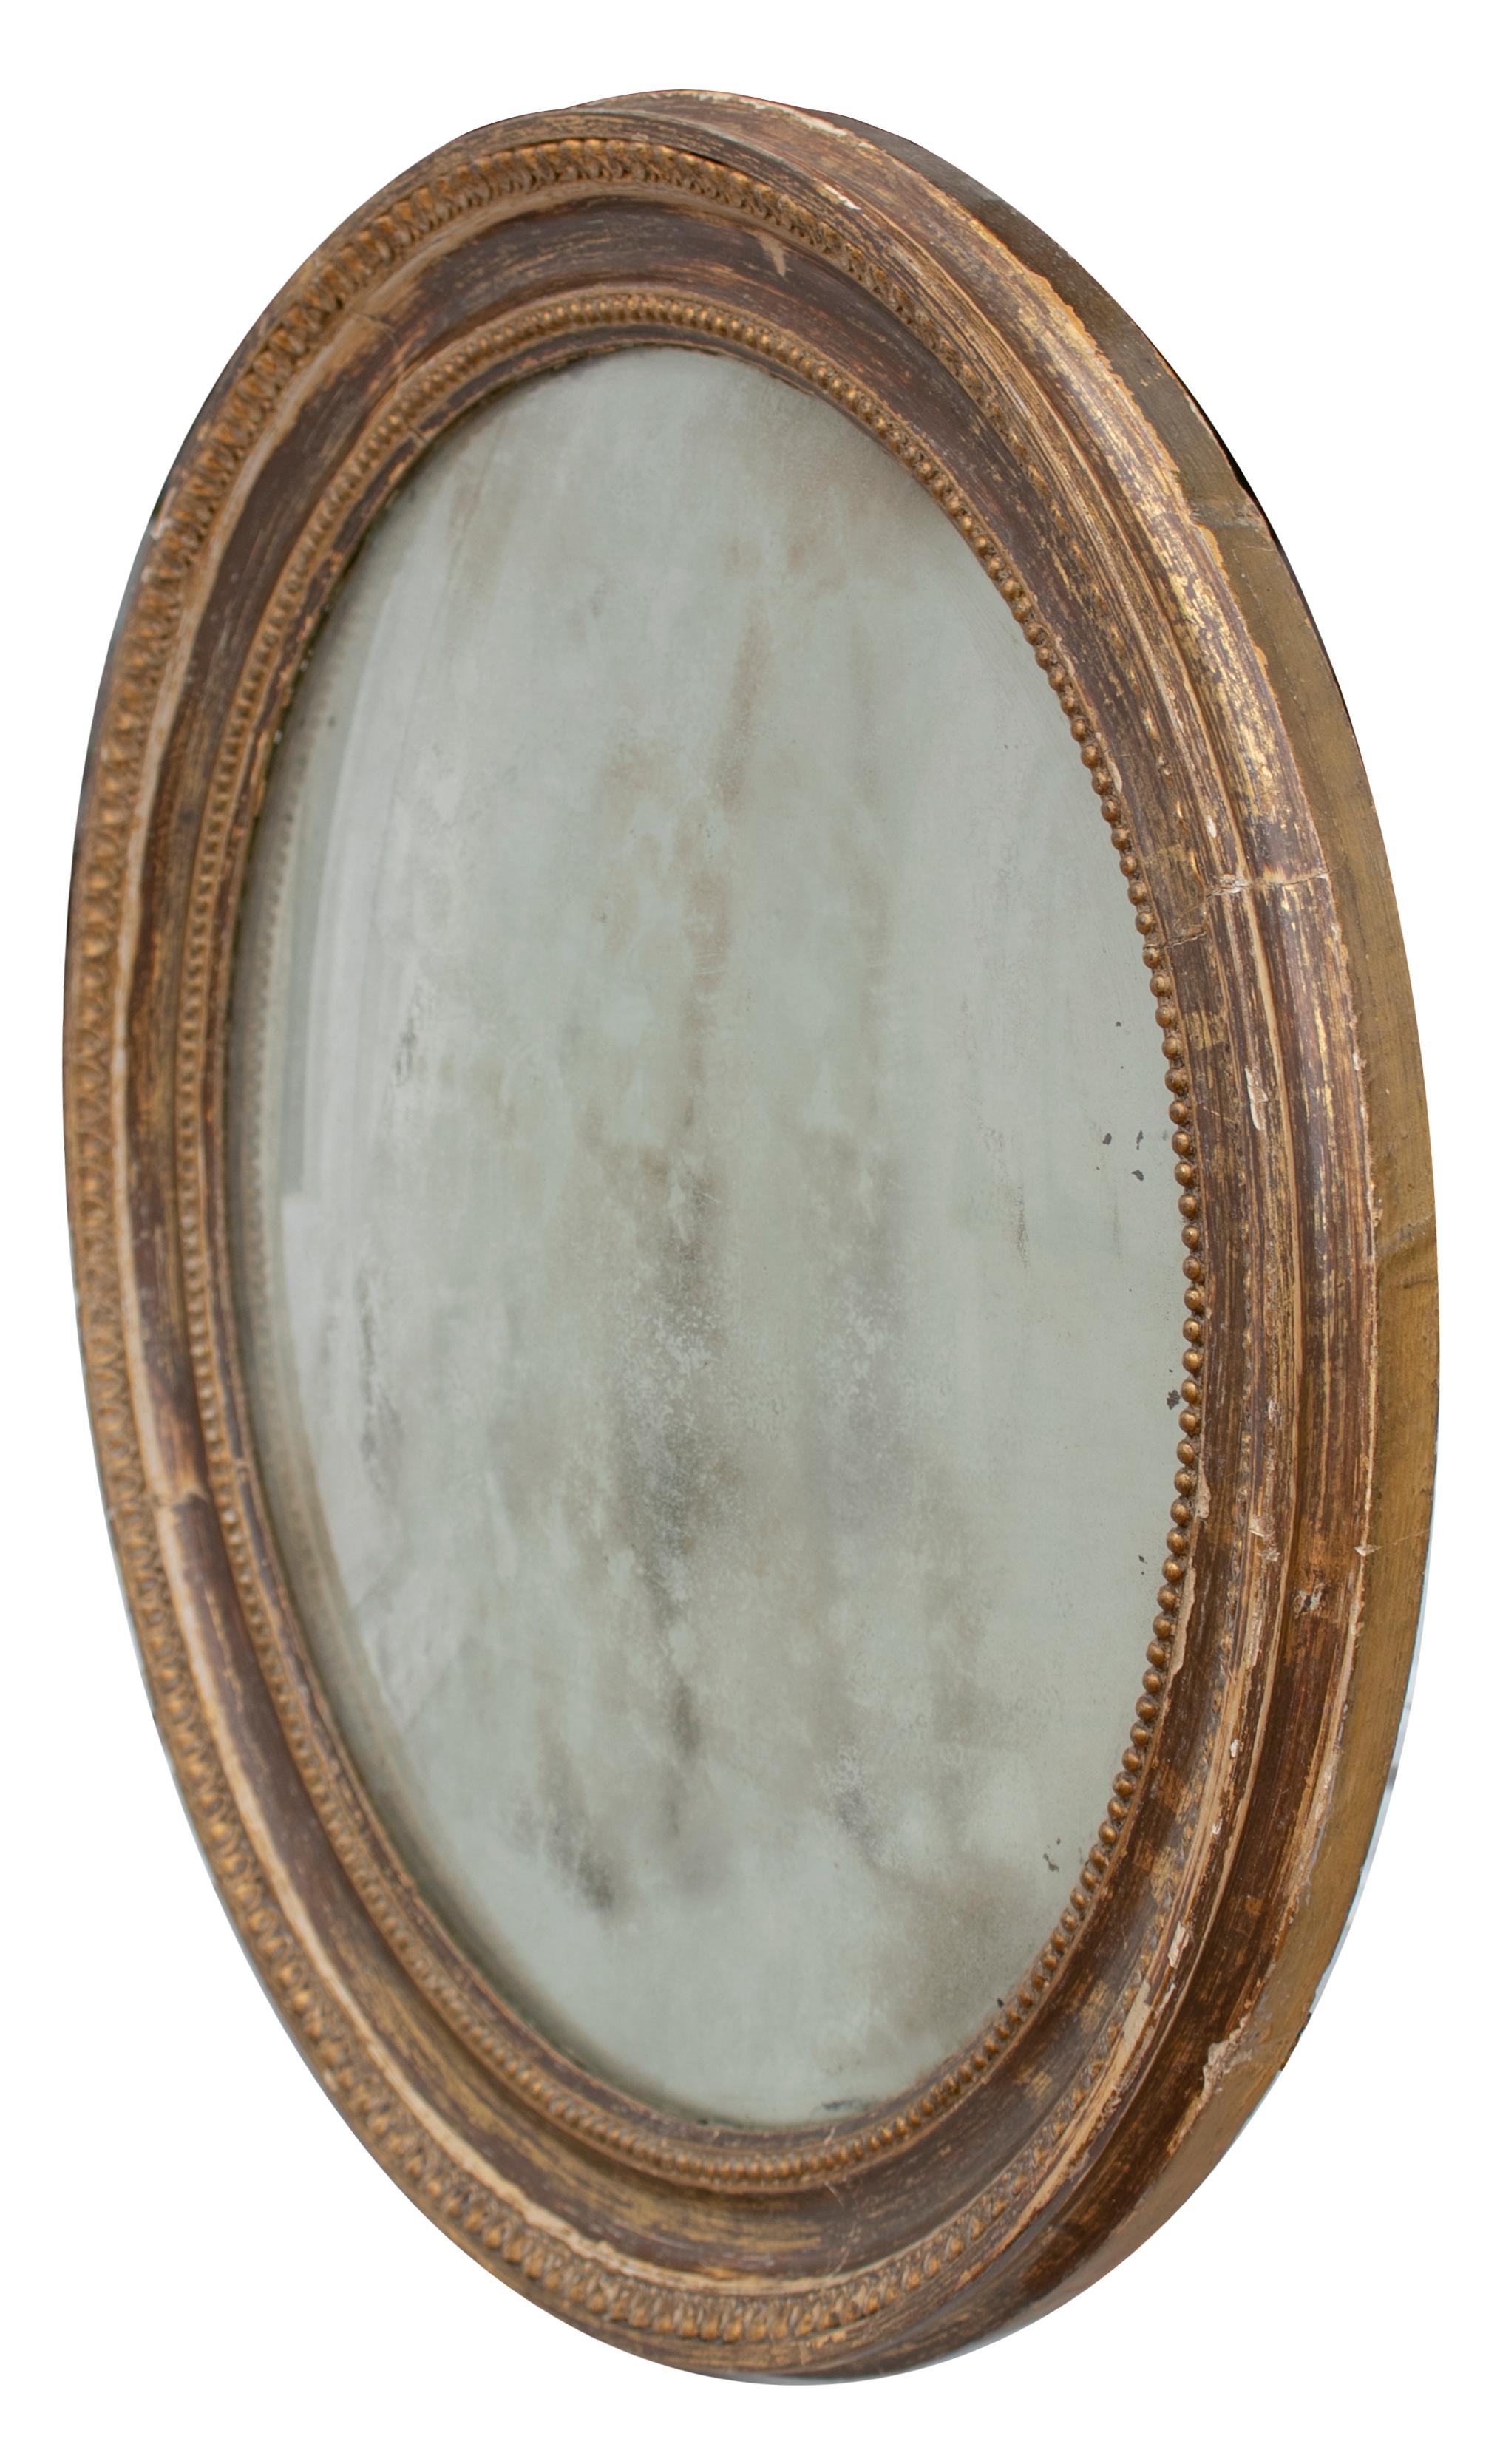 19th century French round mirror with gilt frame.